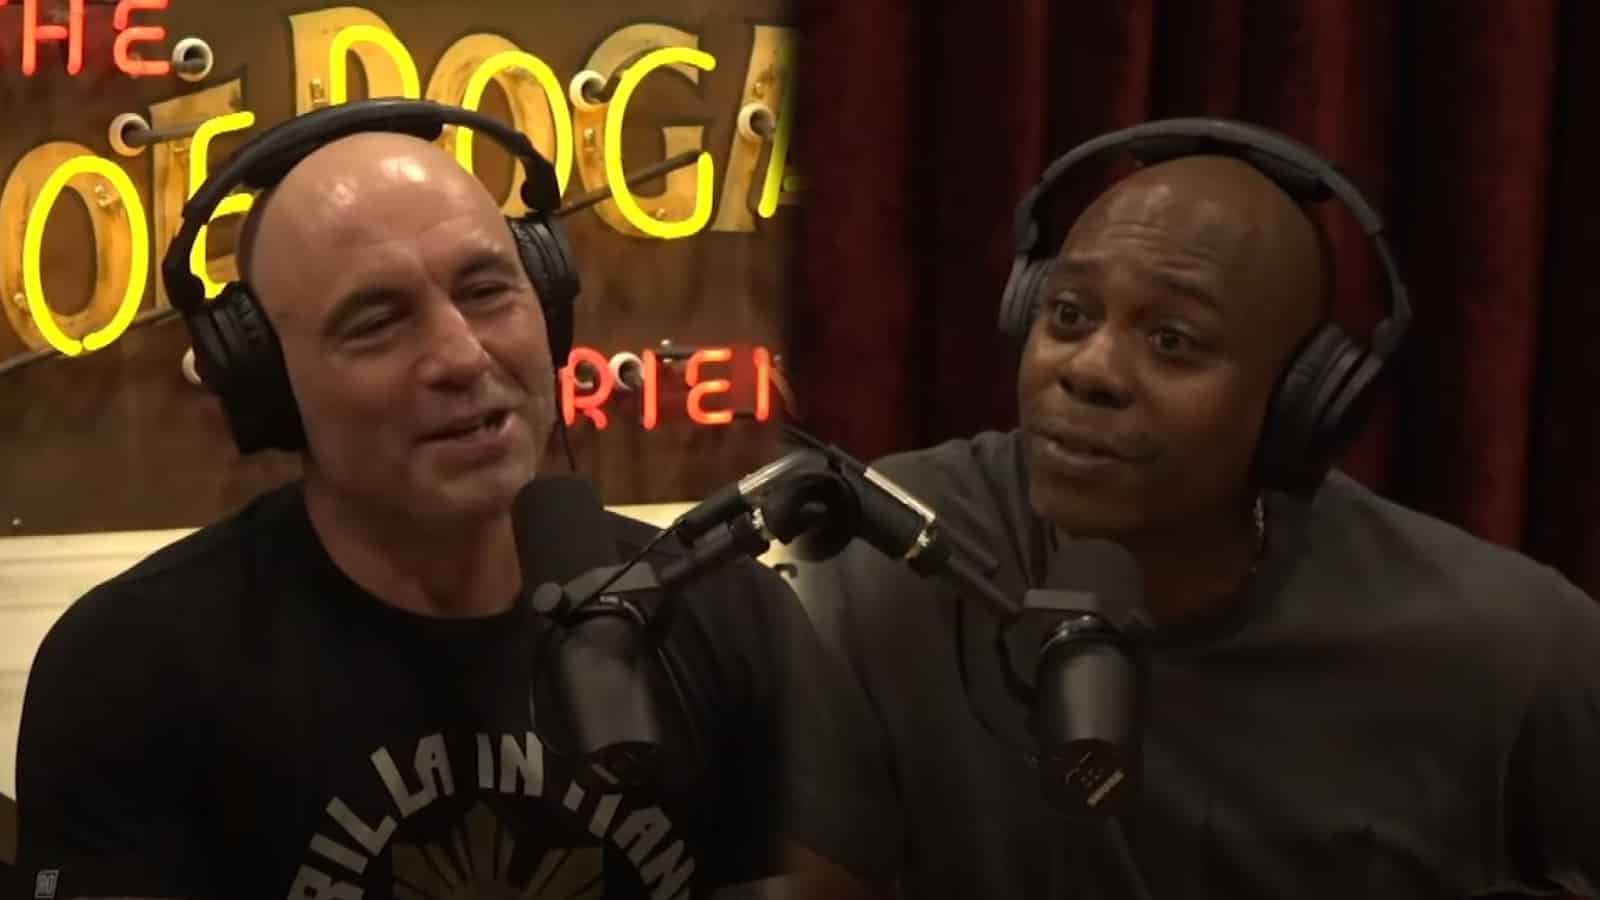 Joe Rogan next to Dave Chapelle during the JRE podcast